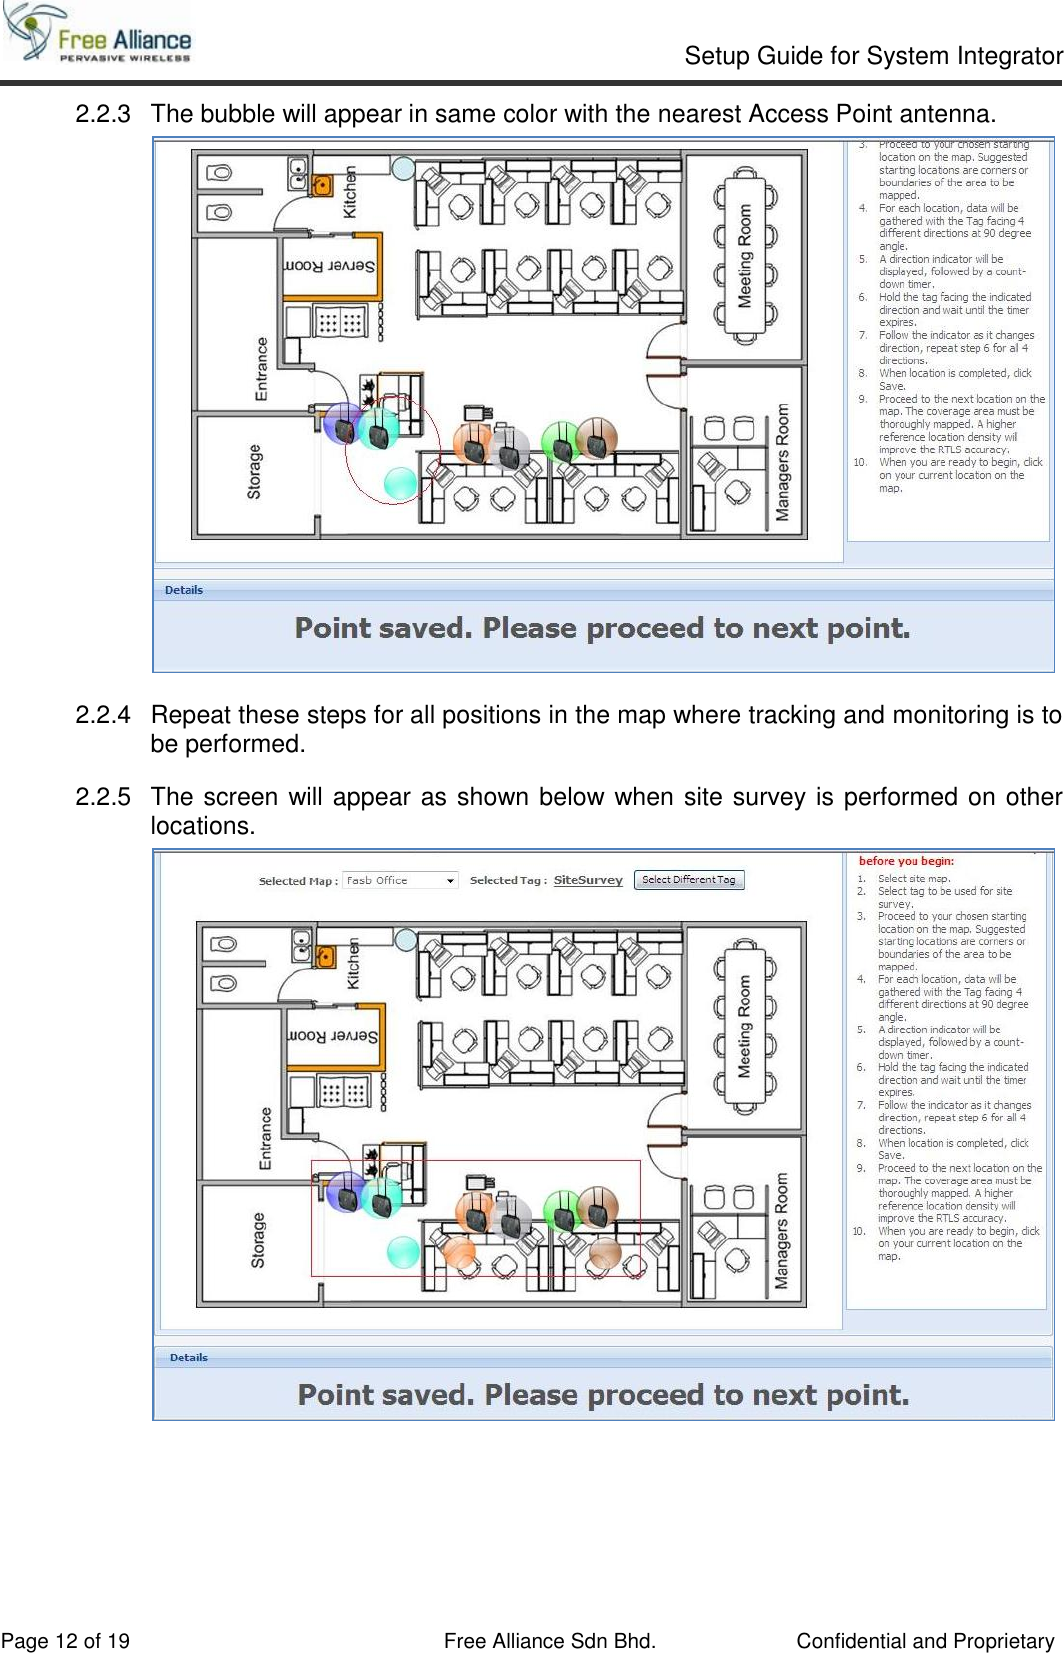     Setup Guide for System Integrator                                                                                                   Page 12 of 19 Free Alliance Sdn Bhd.             Confidential and Proprietary 2.2.3  The bubble will appear in same color with the nearest Access Point antenna.  2.2.4  Repeat these steps for all positions in the map where tracking and monitoring is to be performed.  2.2.5  The screen will appear as shown below when site survey is performed on other locations.     